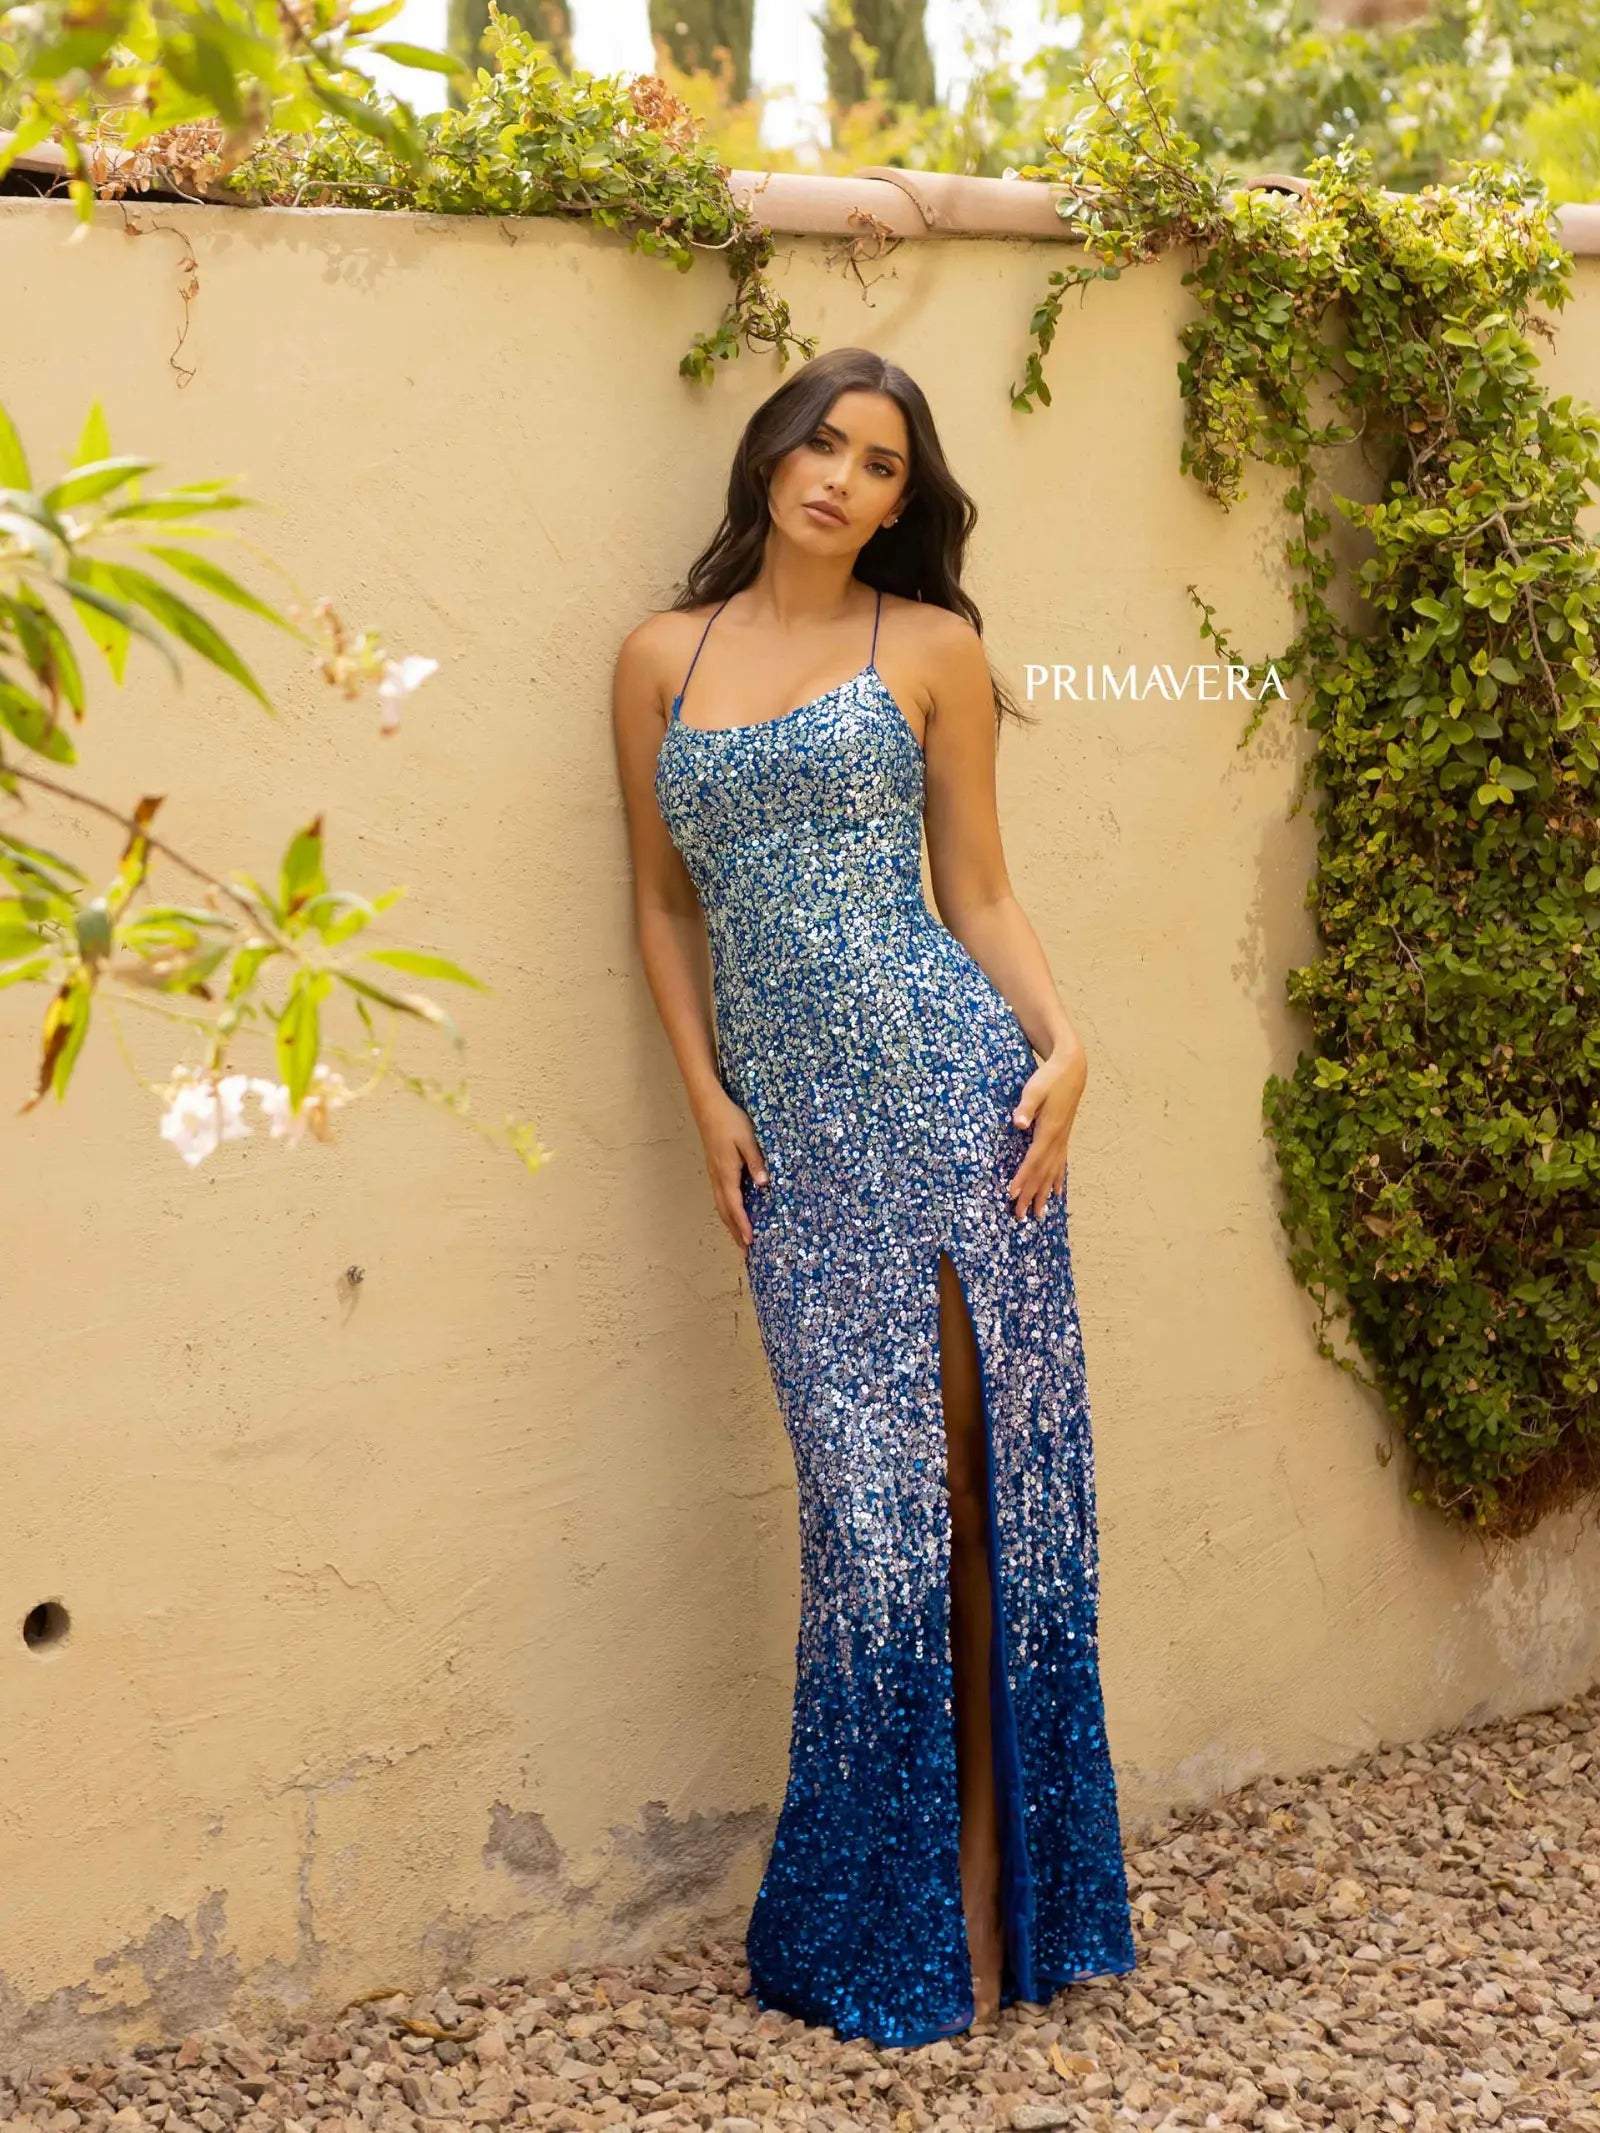 primavera Couture 3916 Long Fitted Sequin Ombre Prom Dress Backless Corset Slit Formal Gown  Sizes: 000-24  Colors: Blue, Pink, Emerald, Mint, Lavender